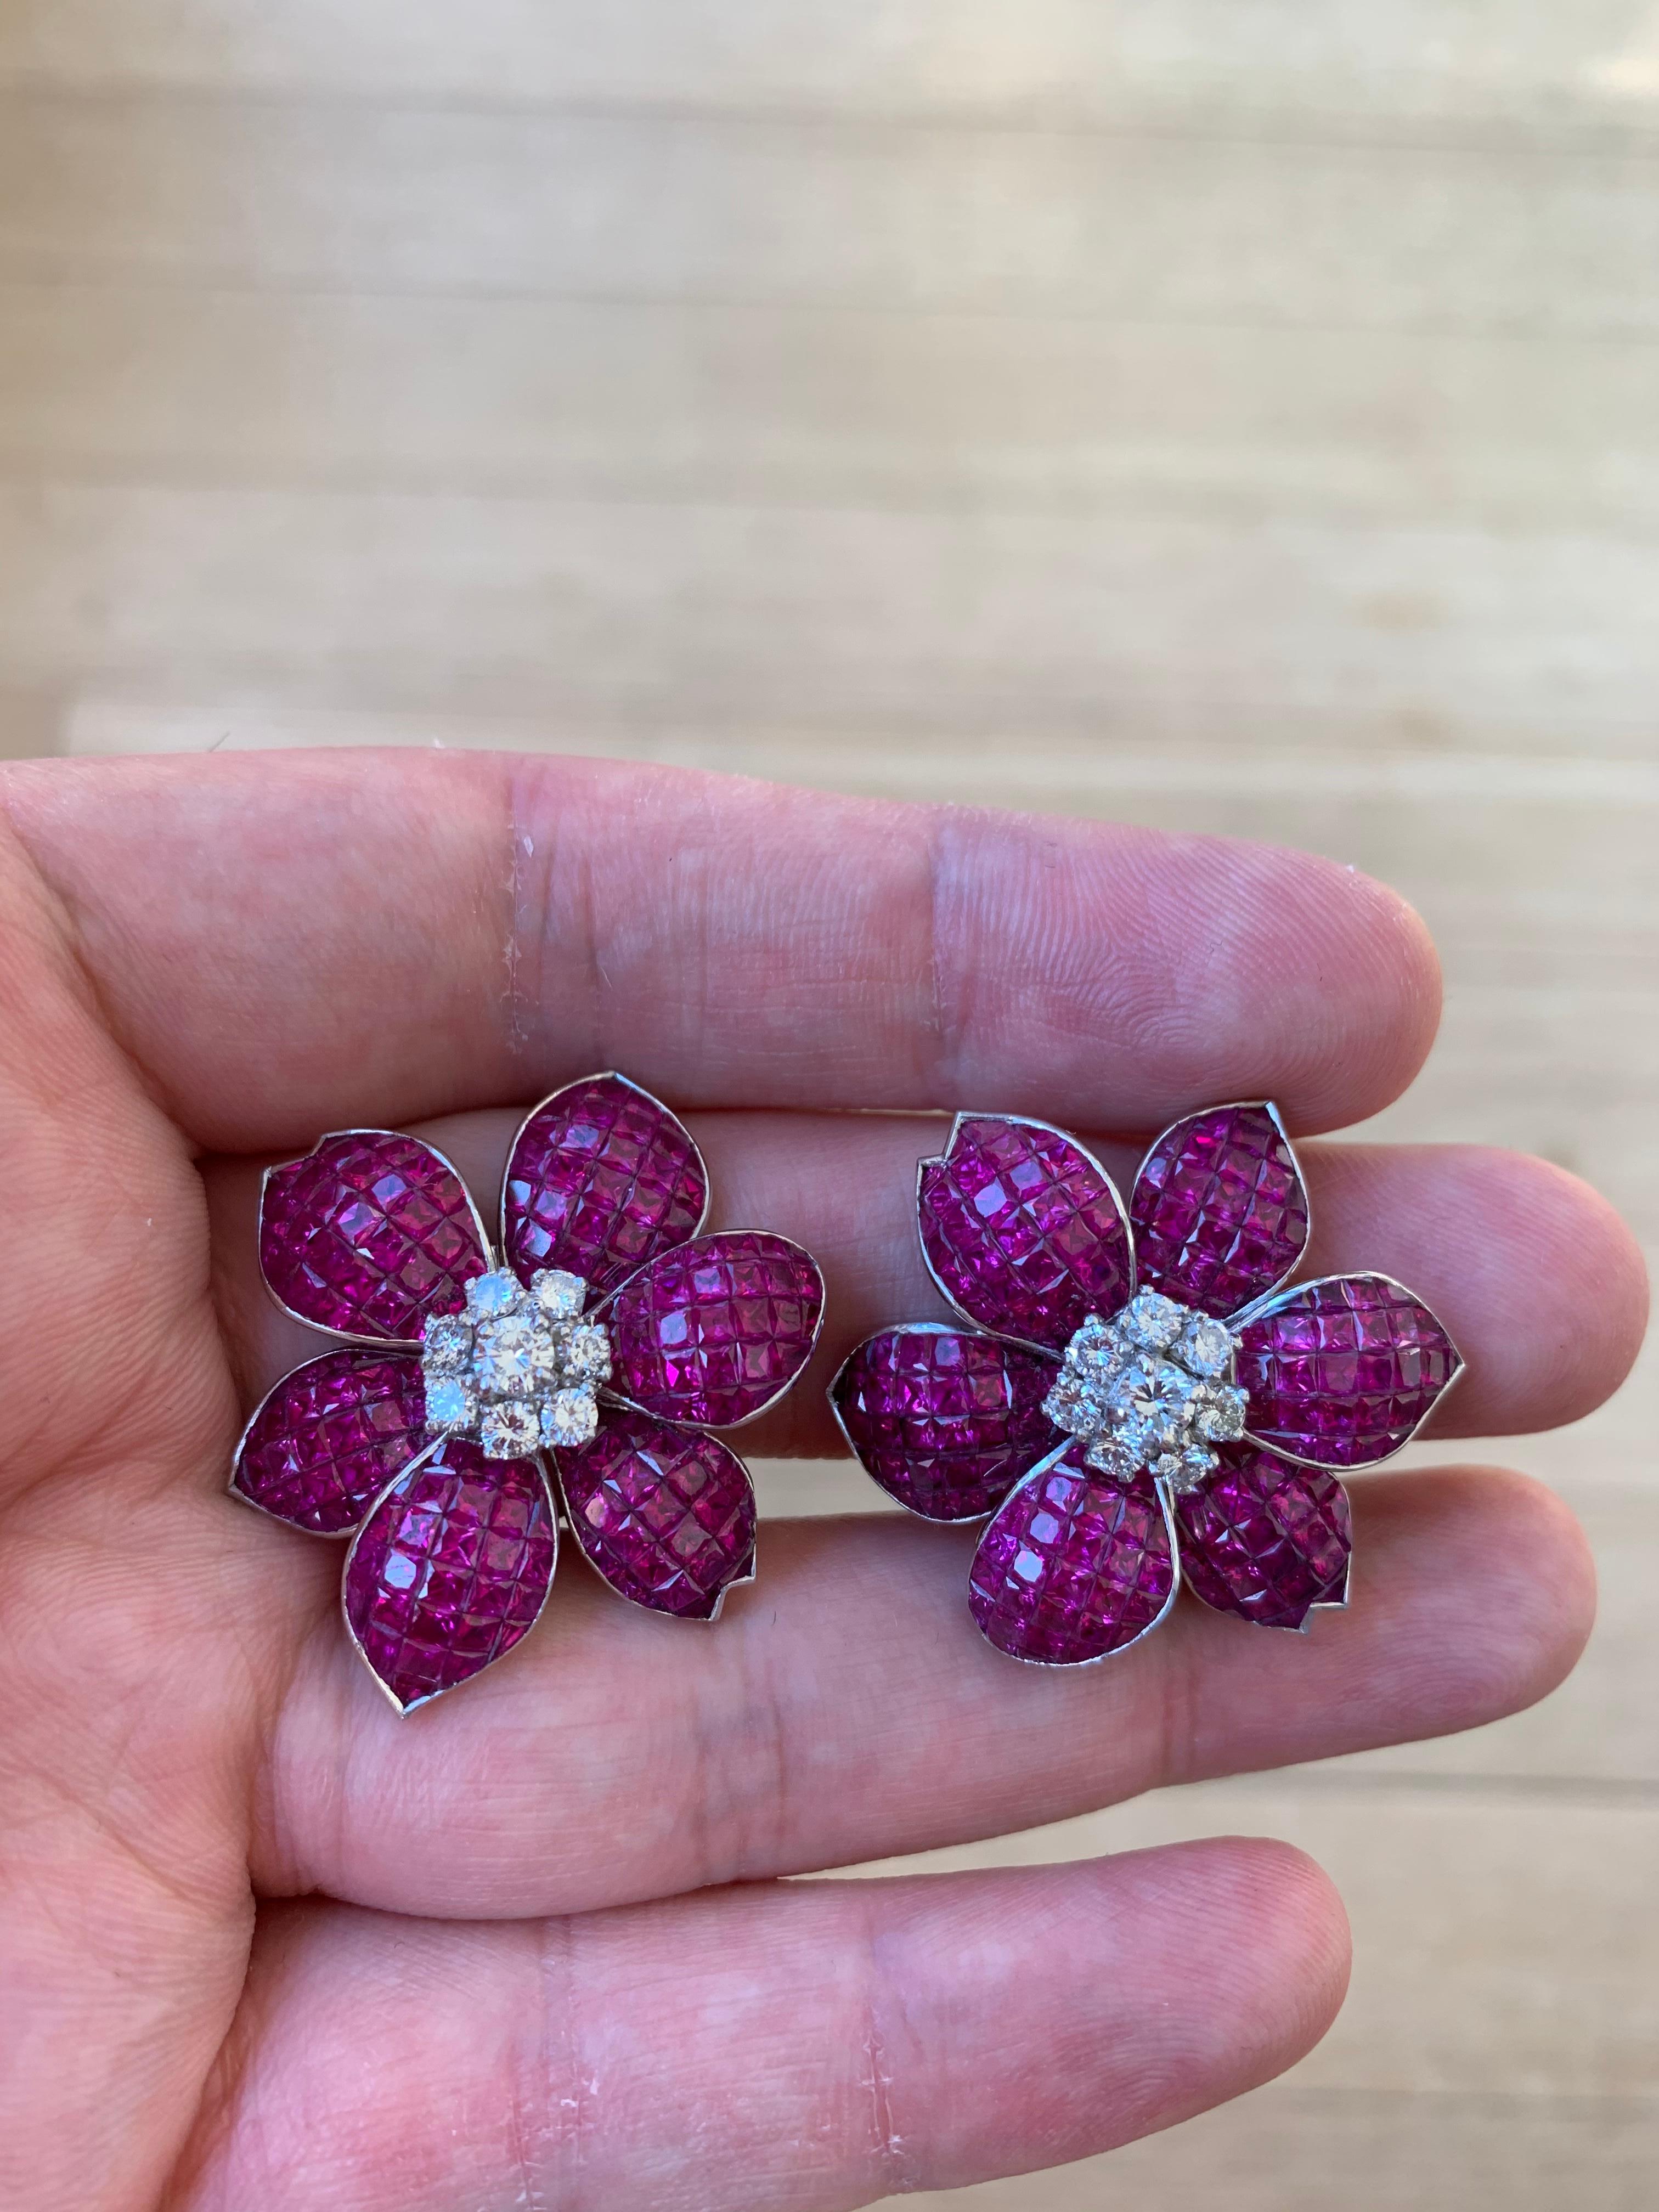 Mystery Set (or invisible set) ruby and diamond Flower Earrings

Approx 1.43 ct diamond and 38.05 ct rubies 

Set in Platinum